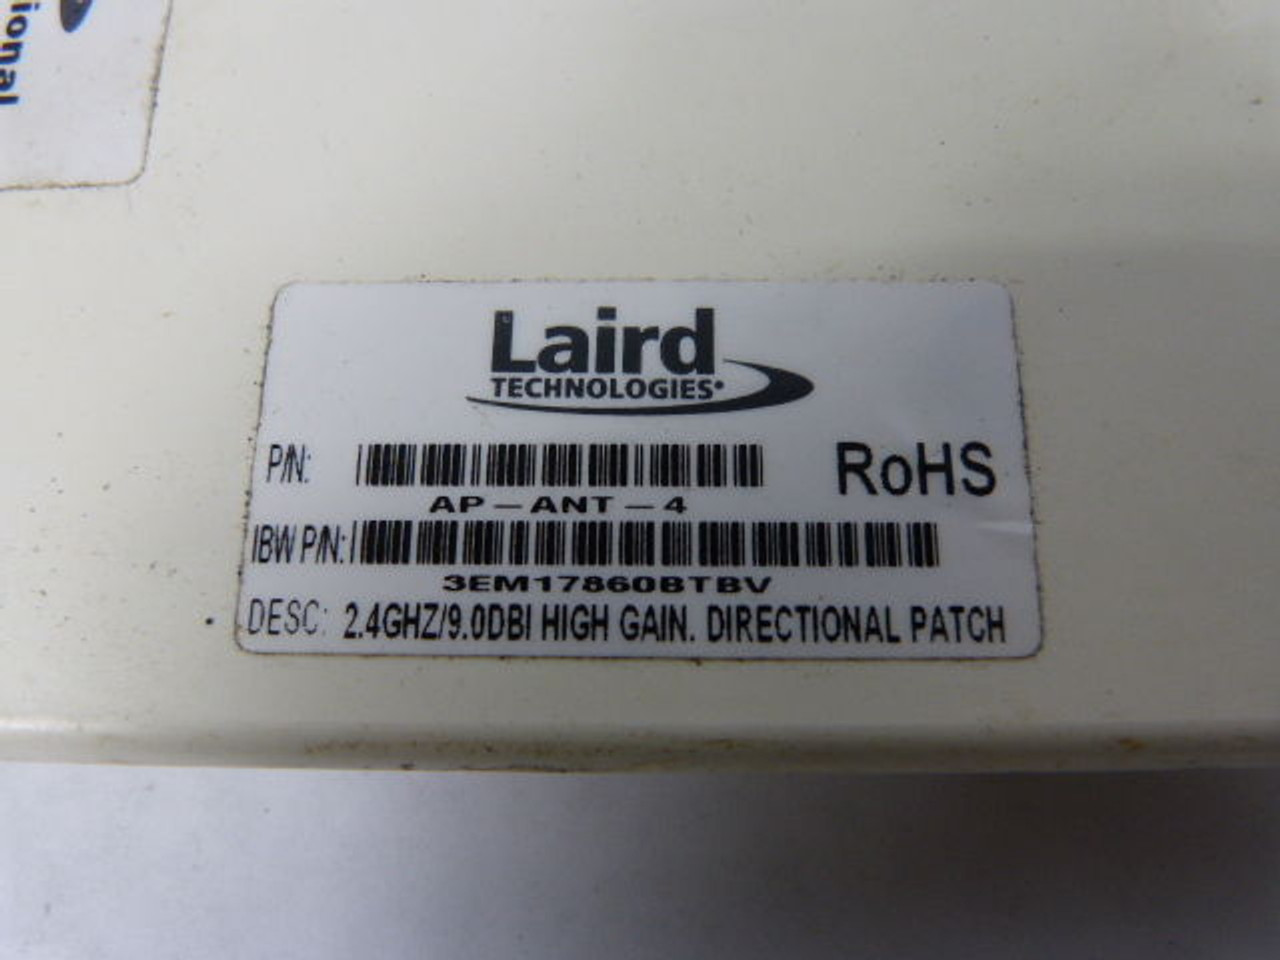 Laird AP-ANT-4 2.4GHz/9.0DBI High Gain Directional Patch USED